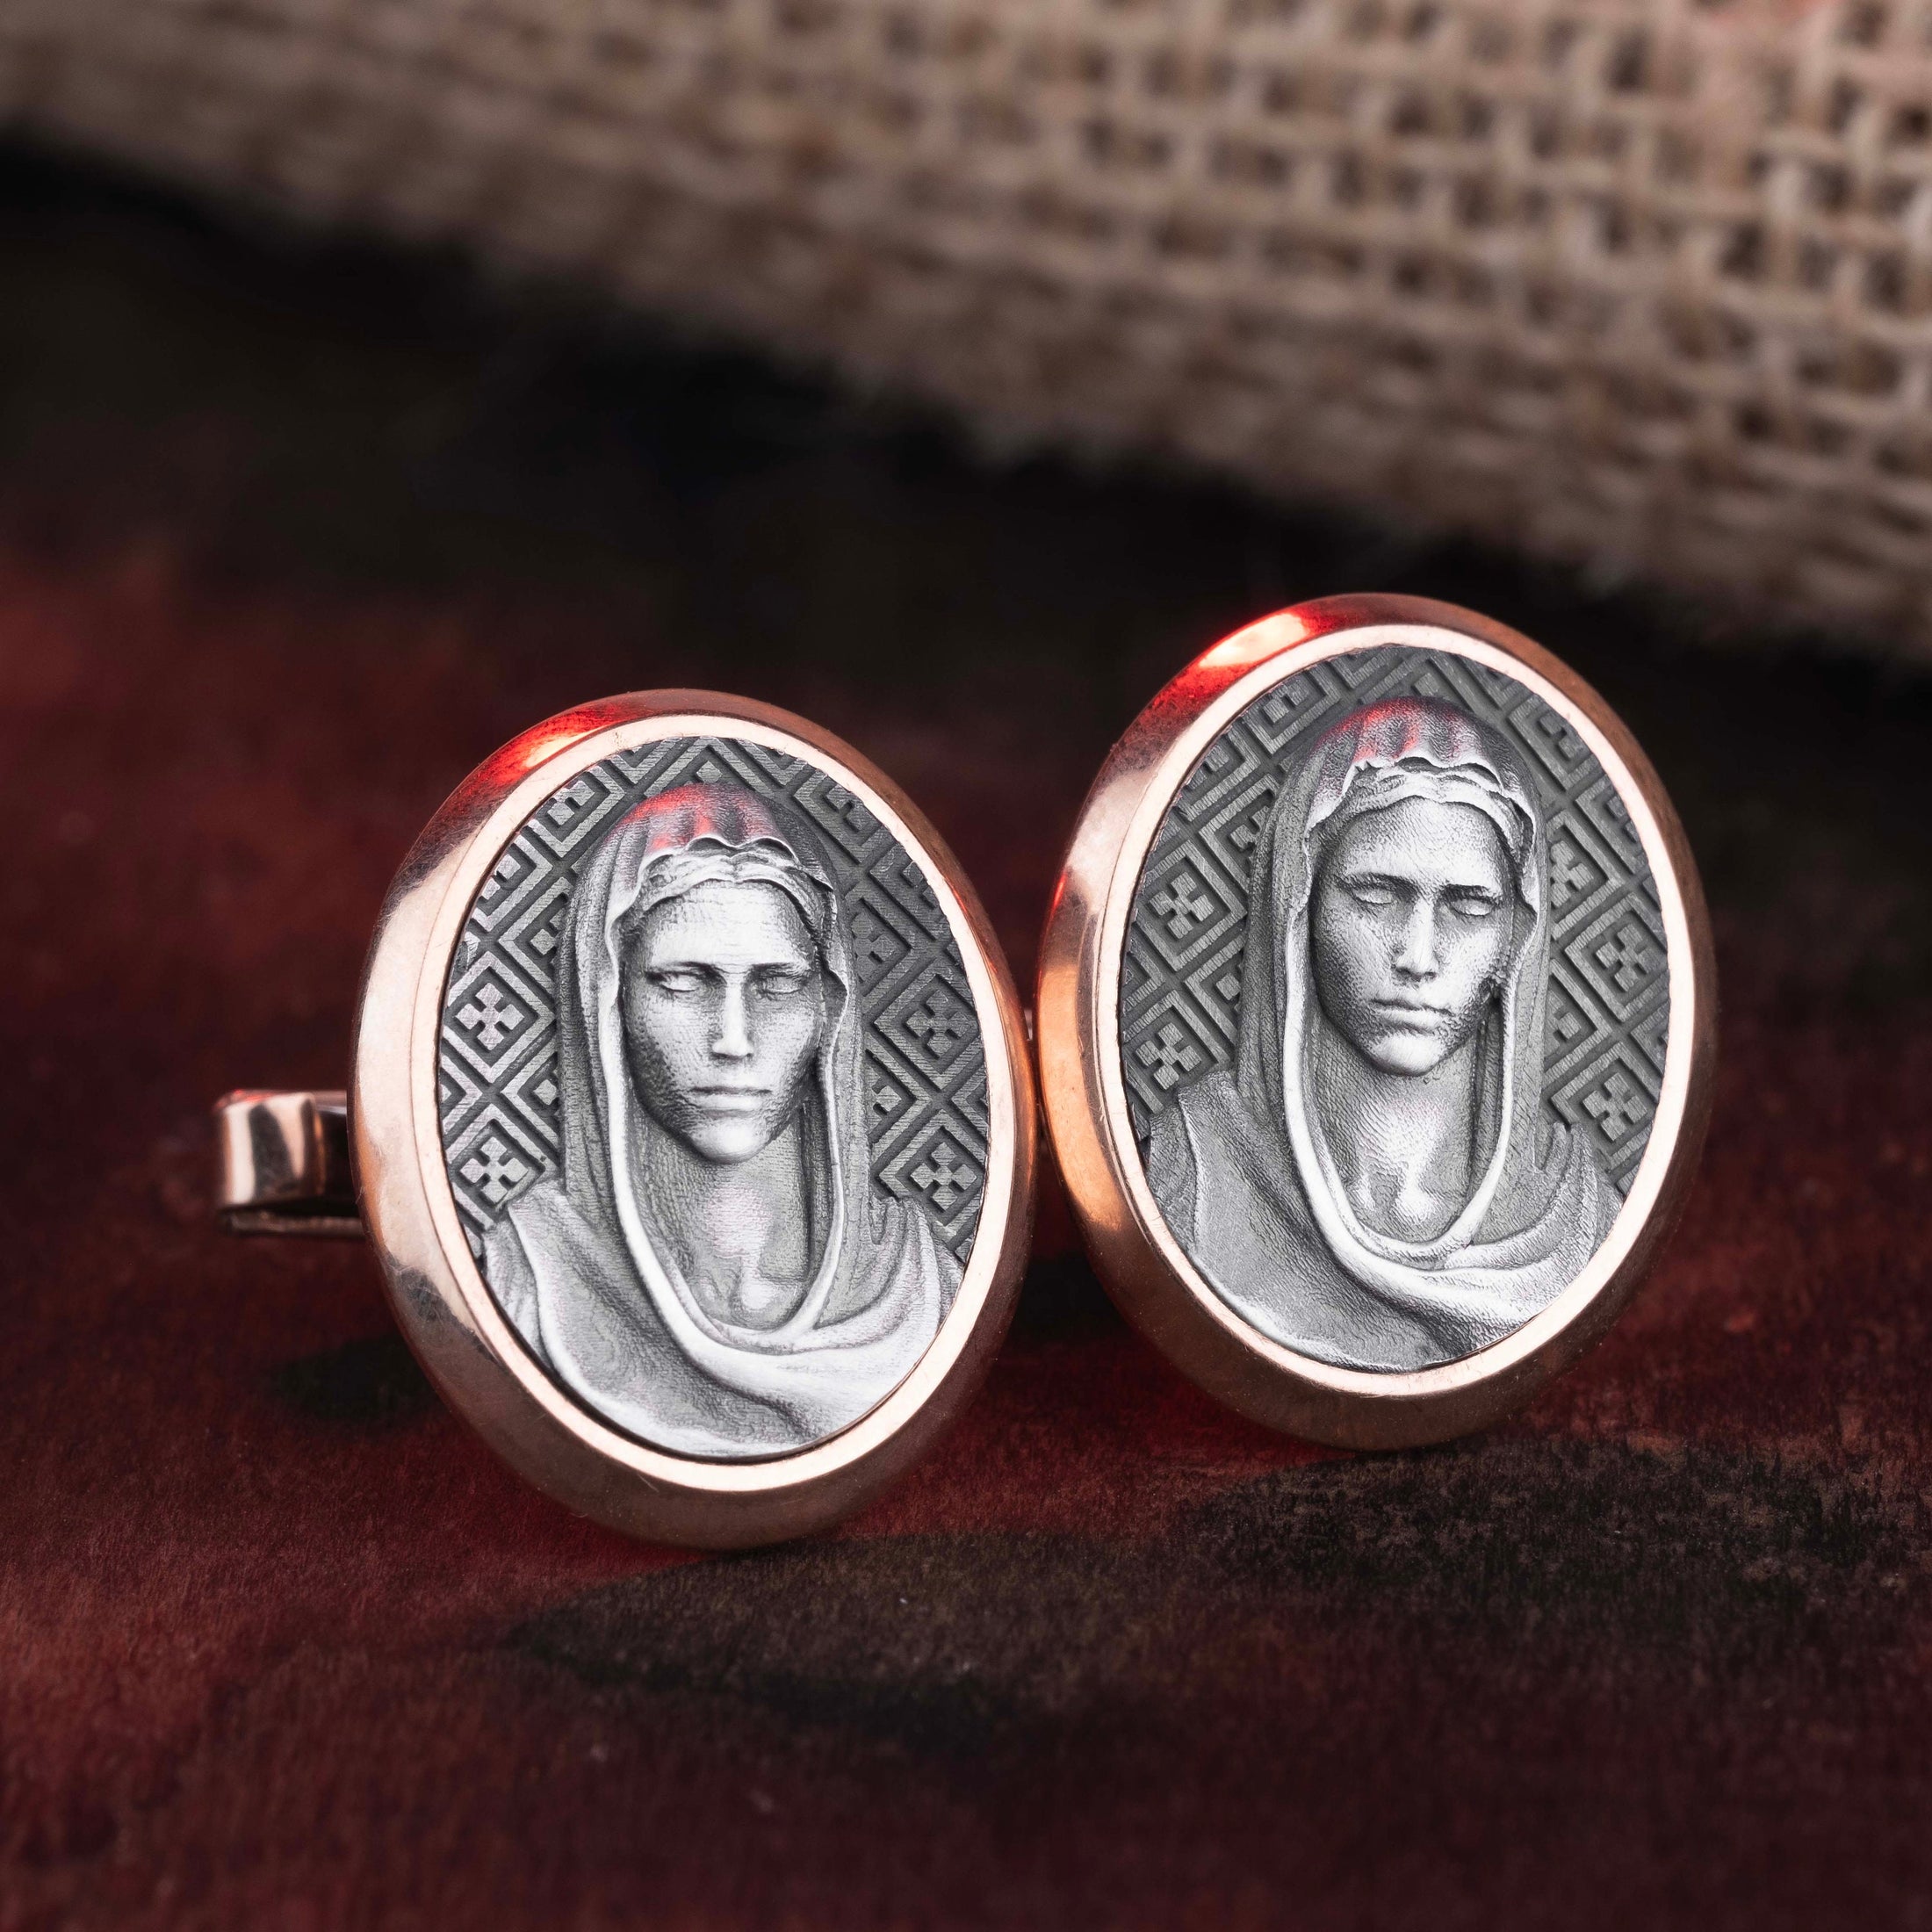 Miraculous Medal Cuff Links, Blessed Virgin Mary, Mother Of God, Memorial Gift, Engraved Cufflinks, Catholic Cufflinks, Religious Gift